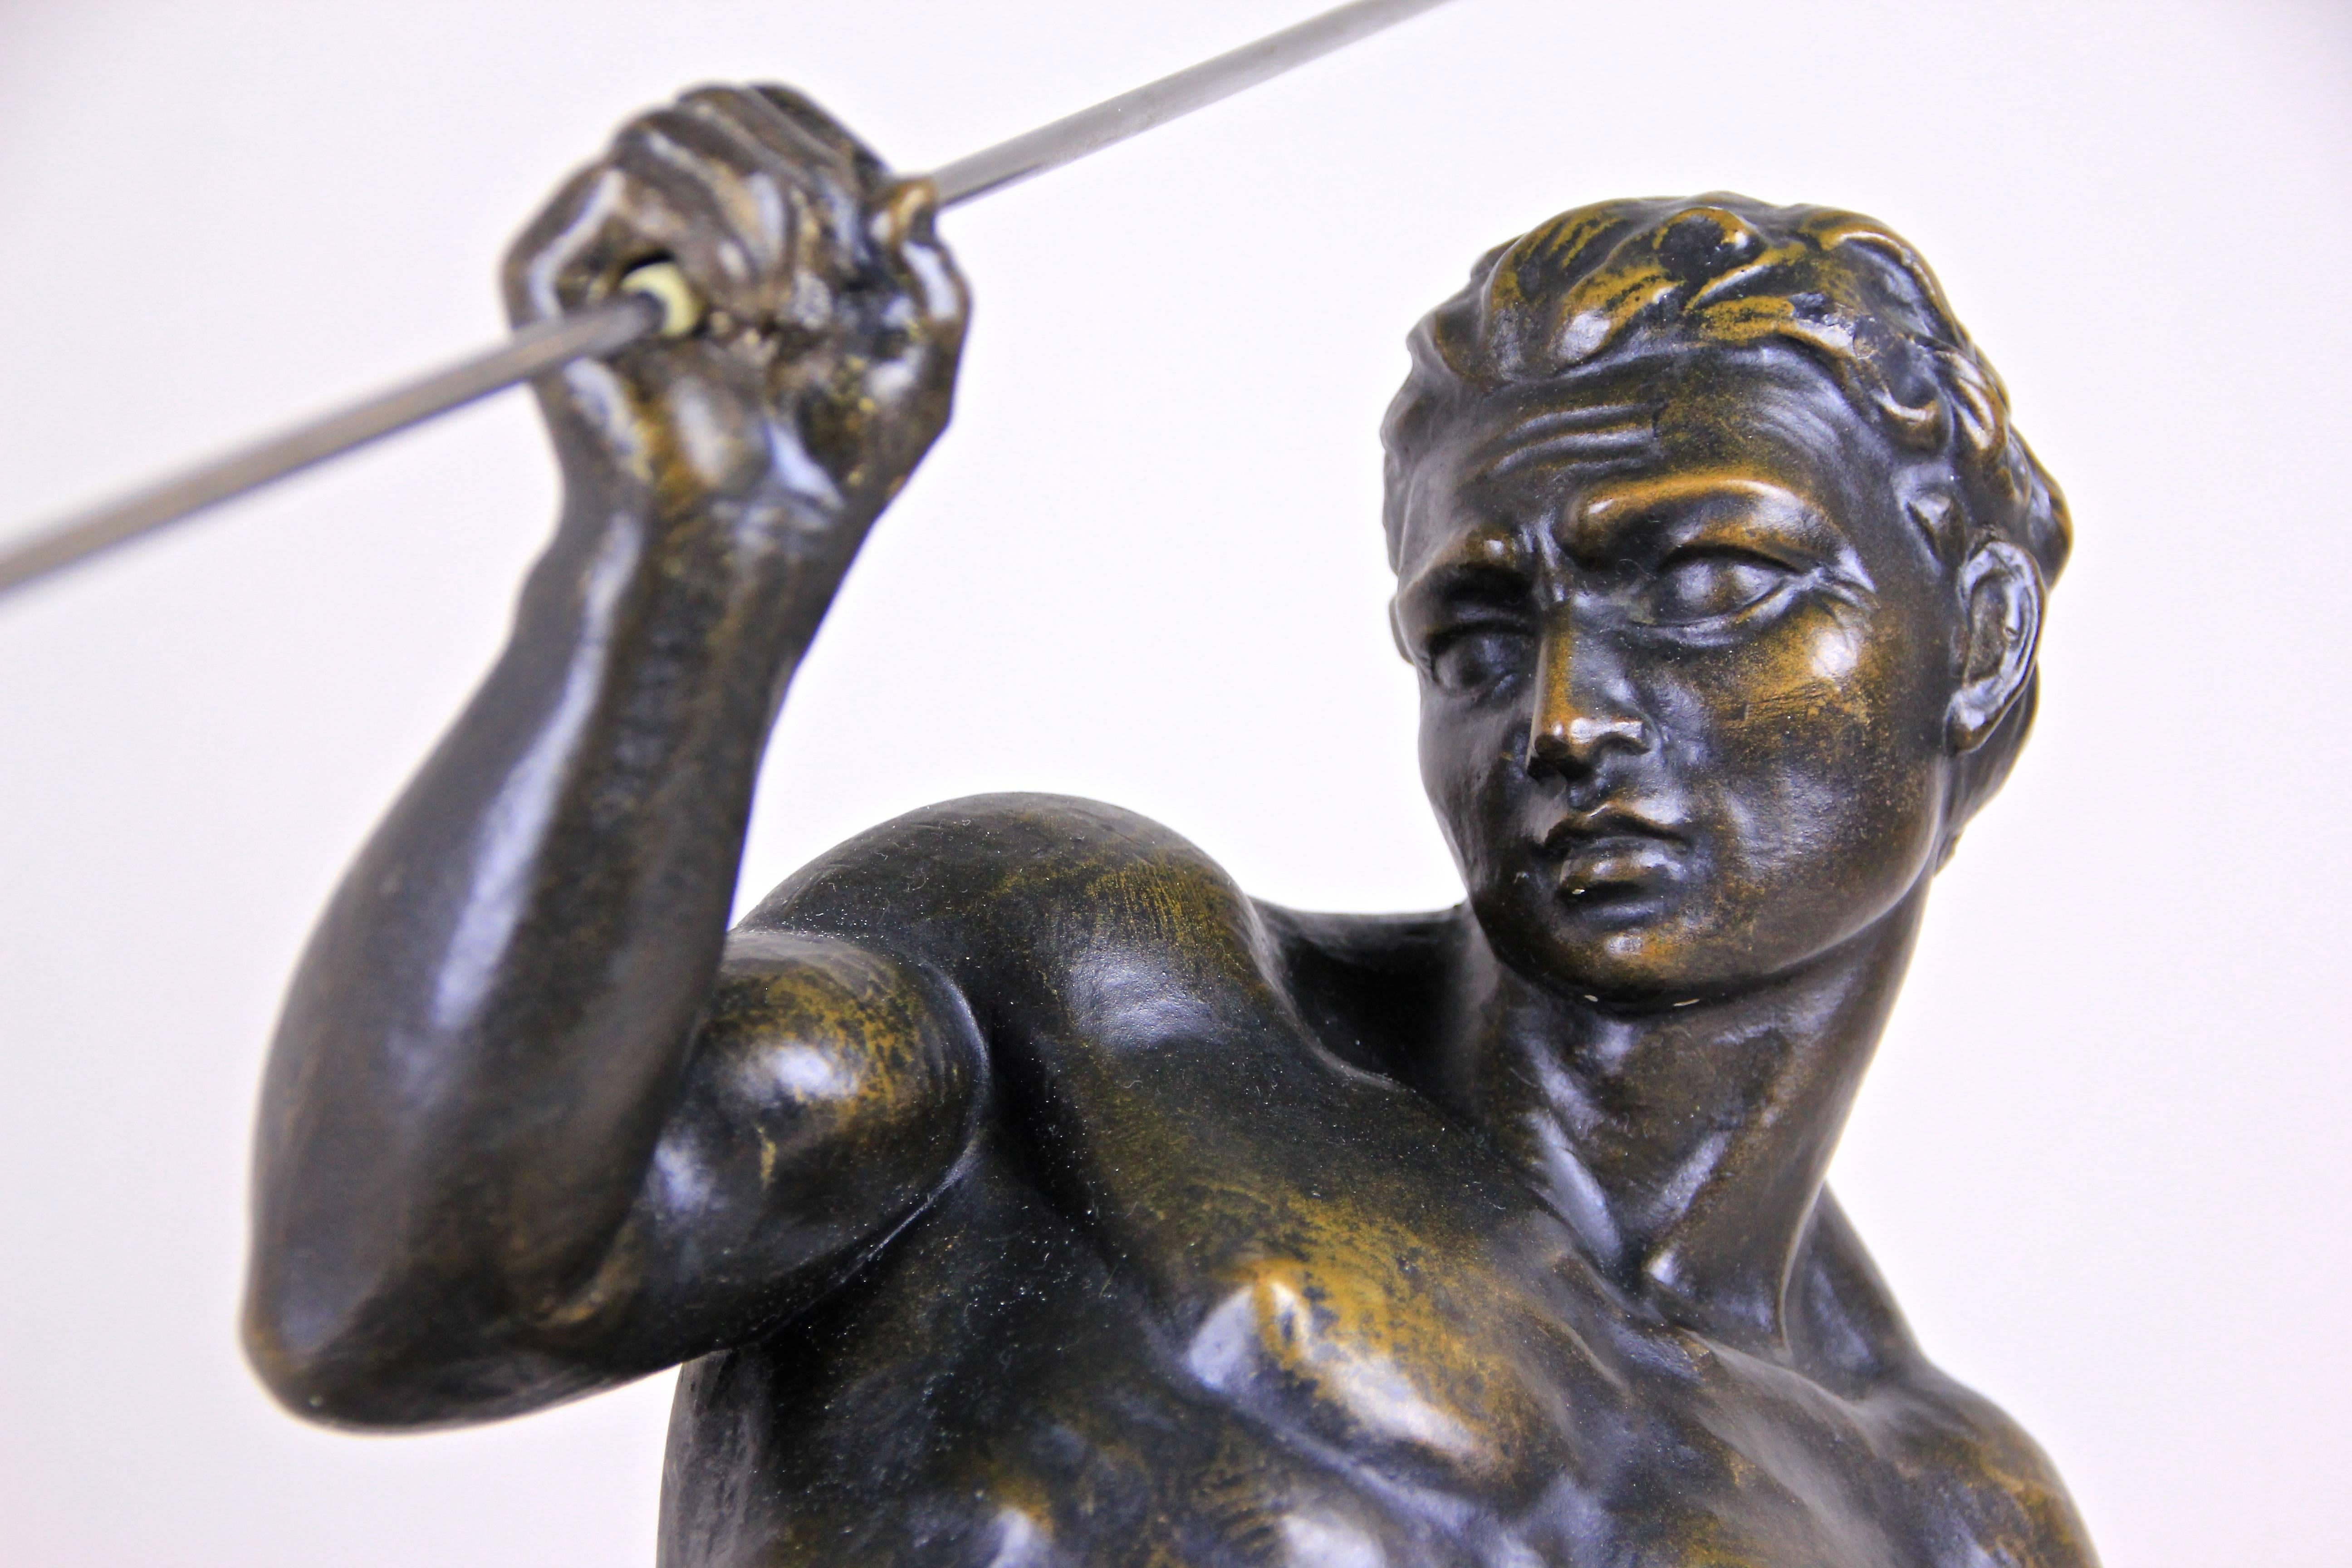 Fantastic large Art Deco sculpture by Italian sculptor Salvatore Melani (1902-1934) who worked in France. This great figural Art Deco plaster sculpture shows a roman javelin hurler made with highest attention to details. The sculpture surface